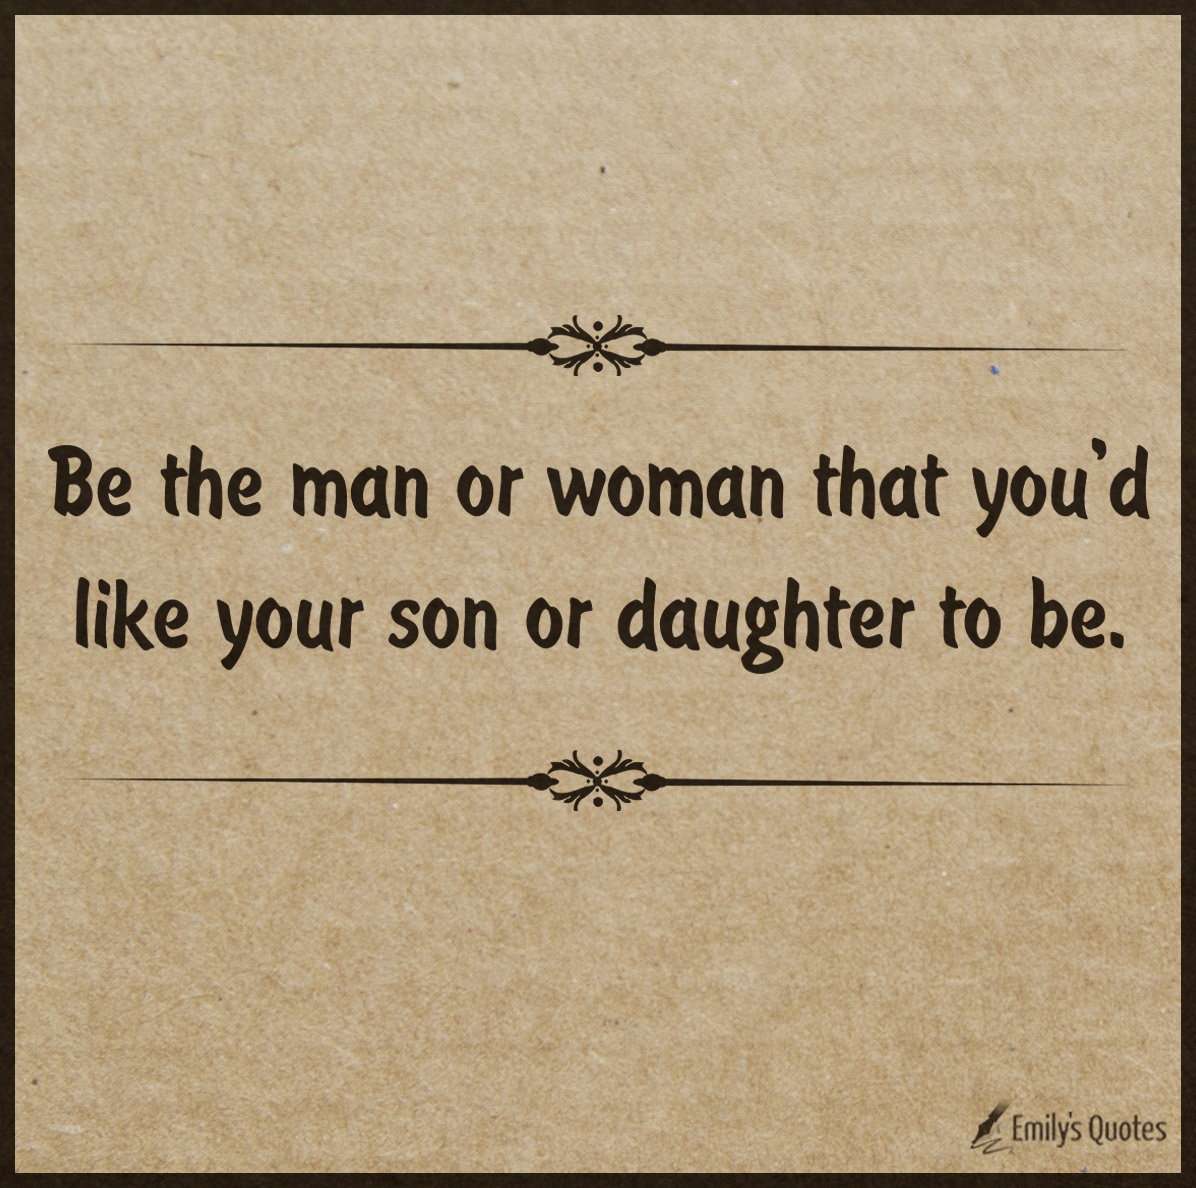 Be the man or woman that you’d like your son or daughter to be